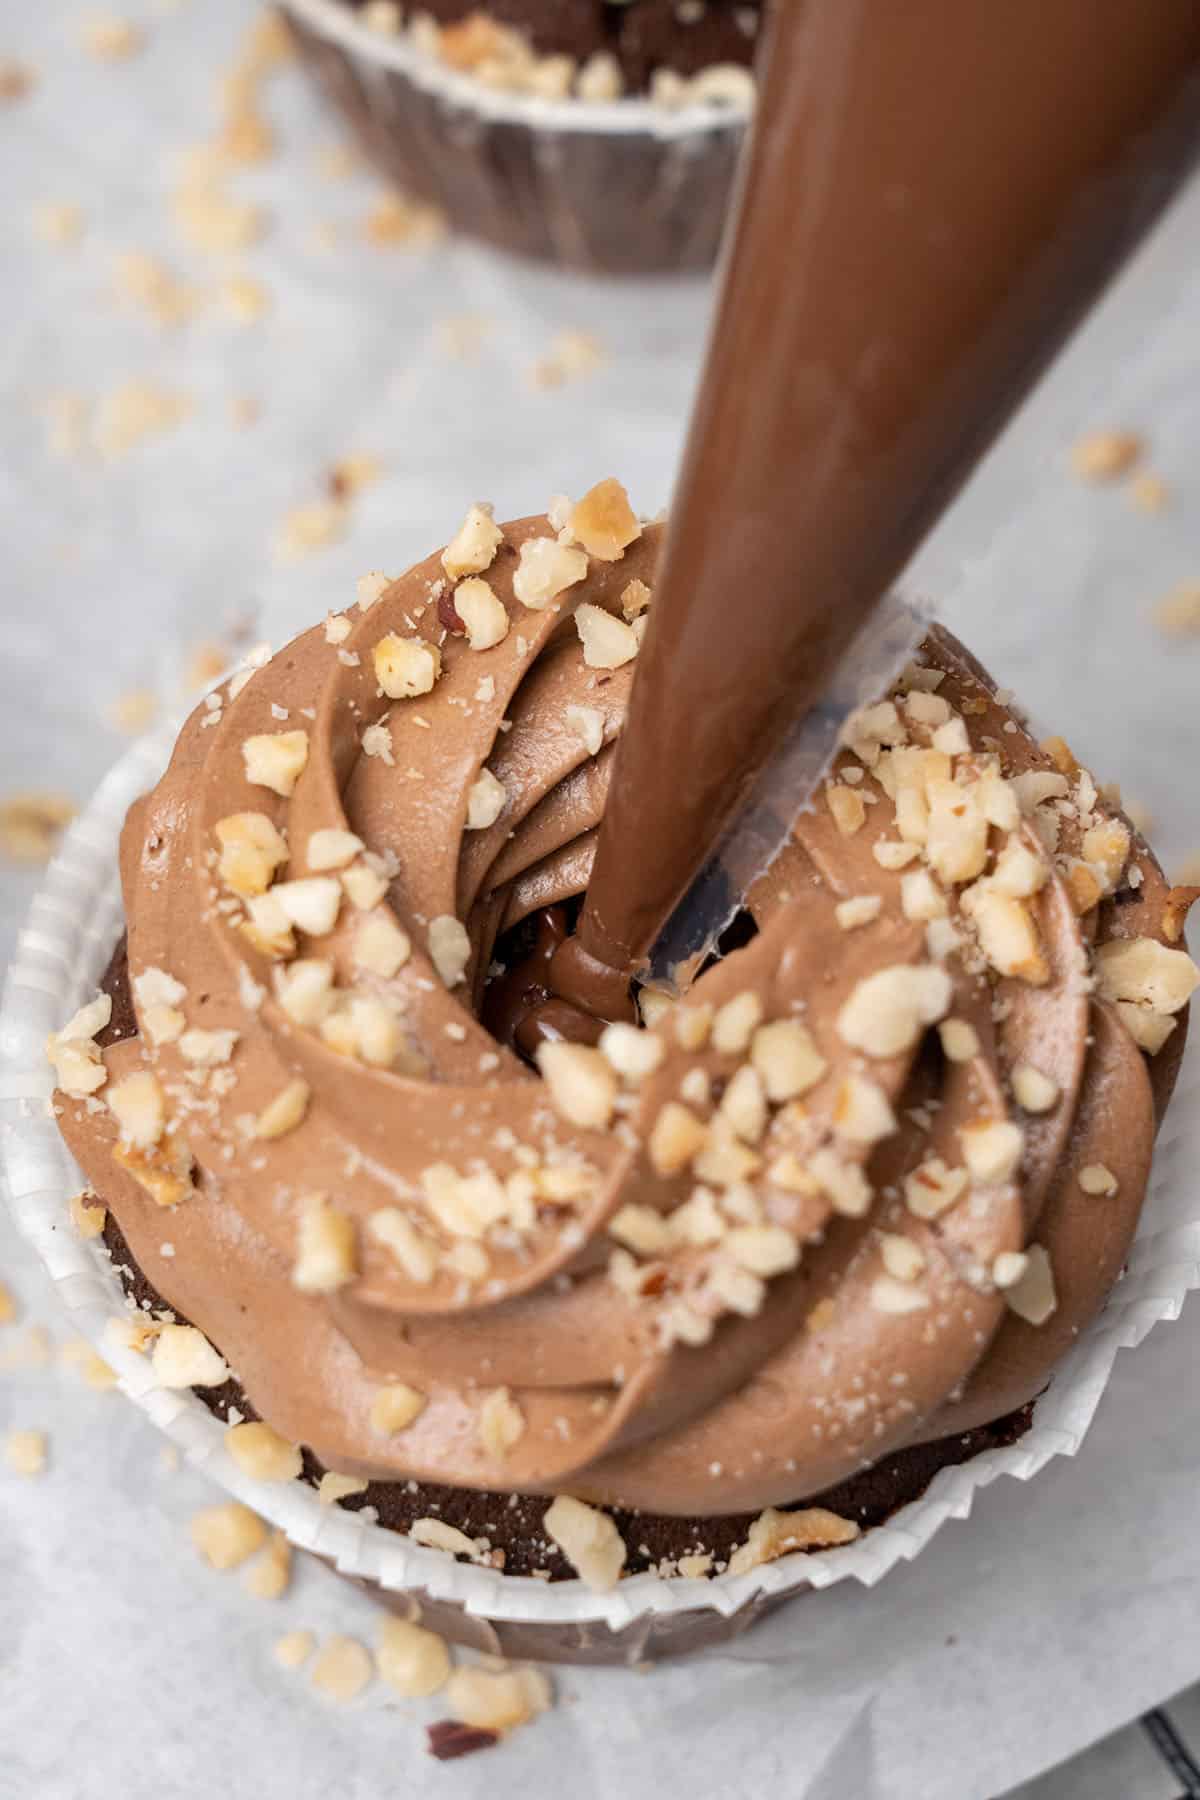 filling a cupcake with nutella.